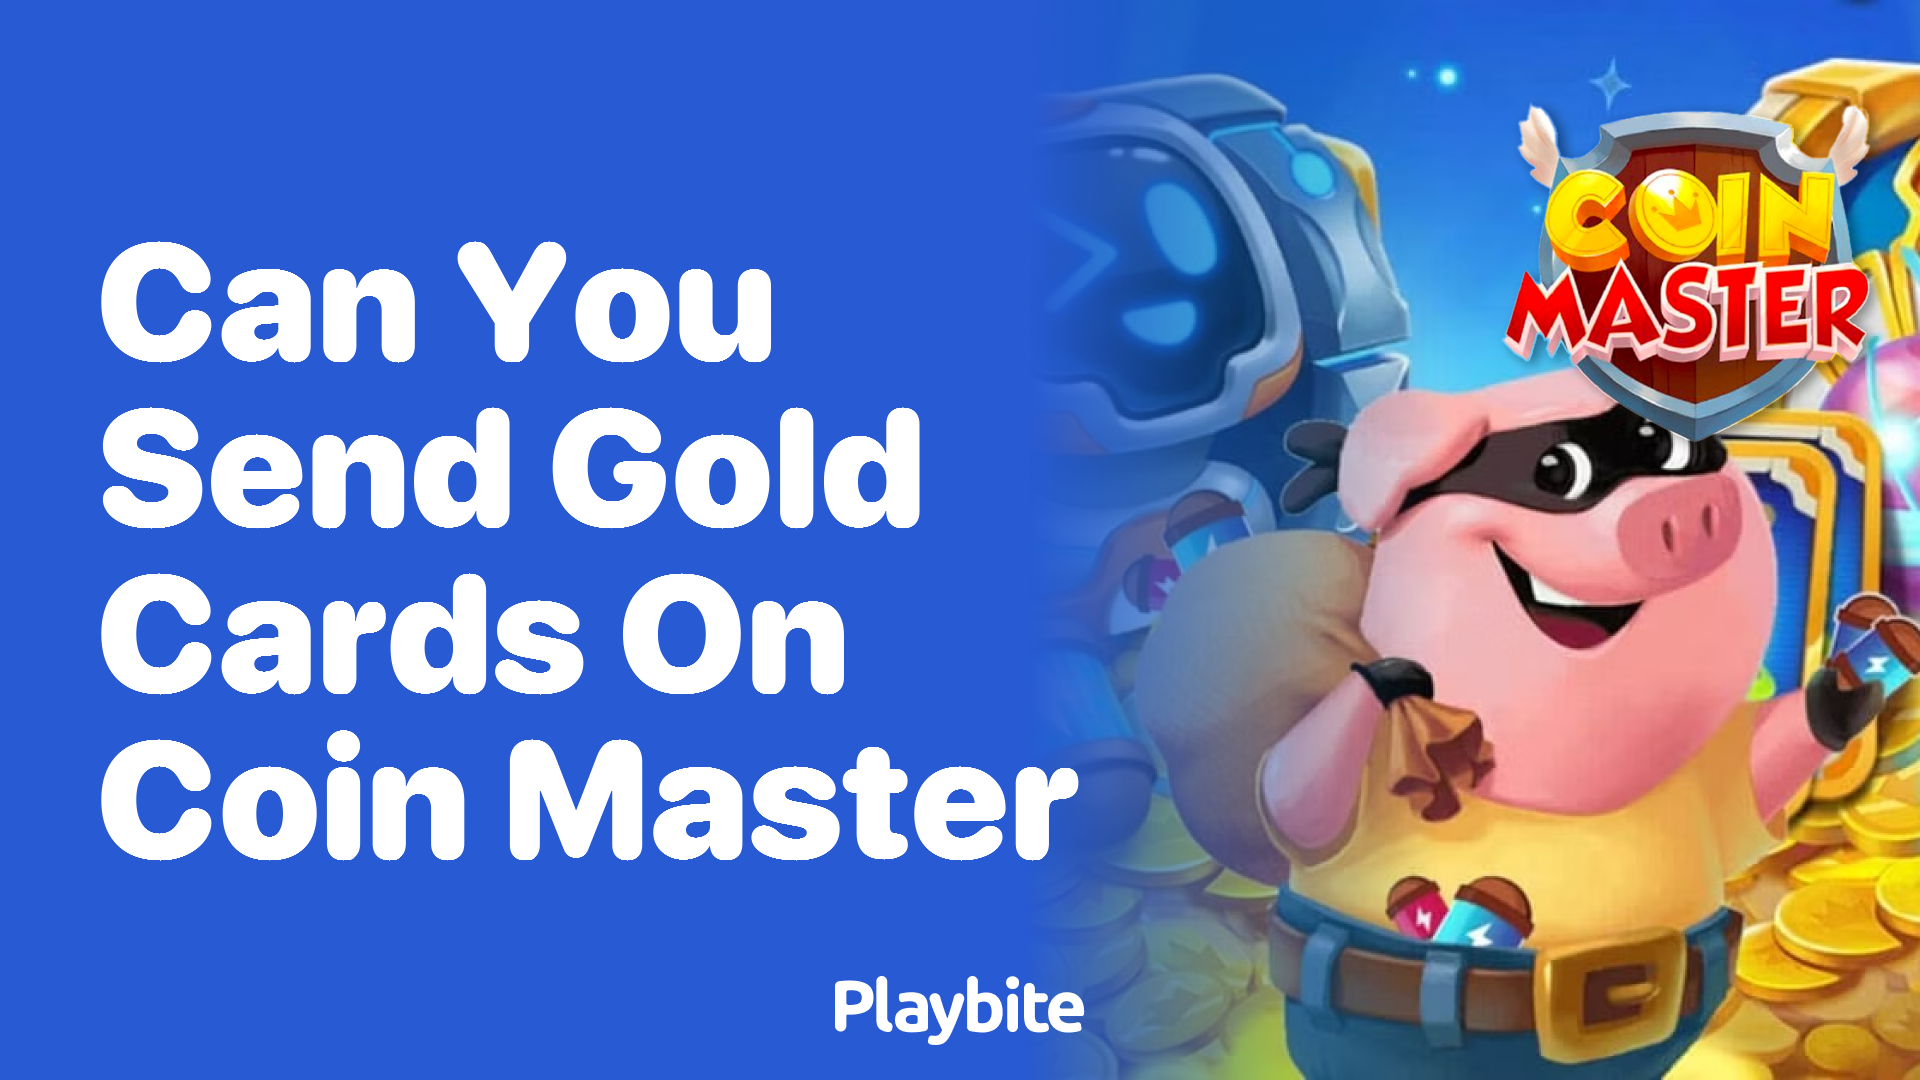 Can You Send Gold Cards on Coin Master? - Playbite